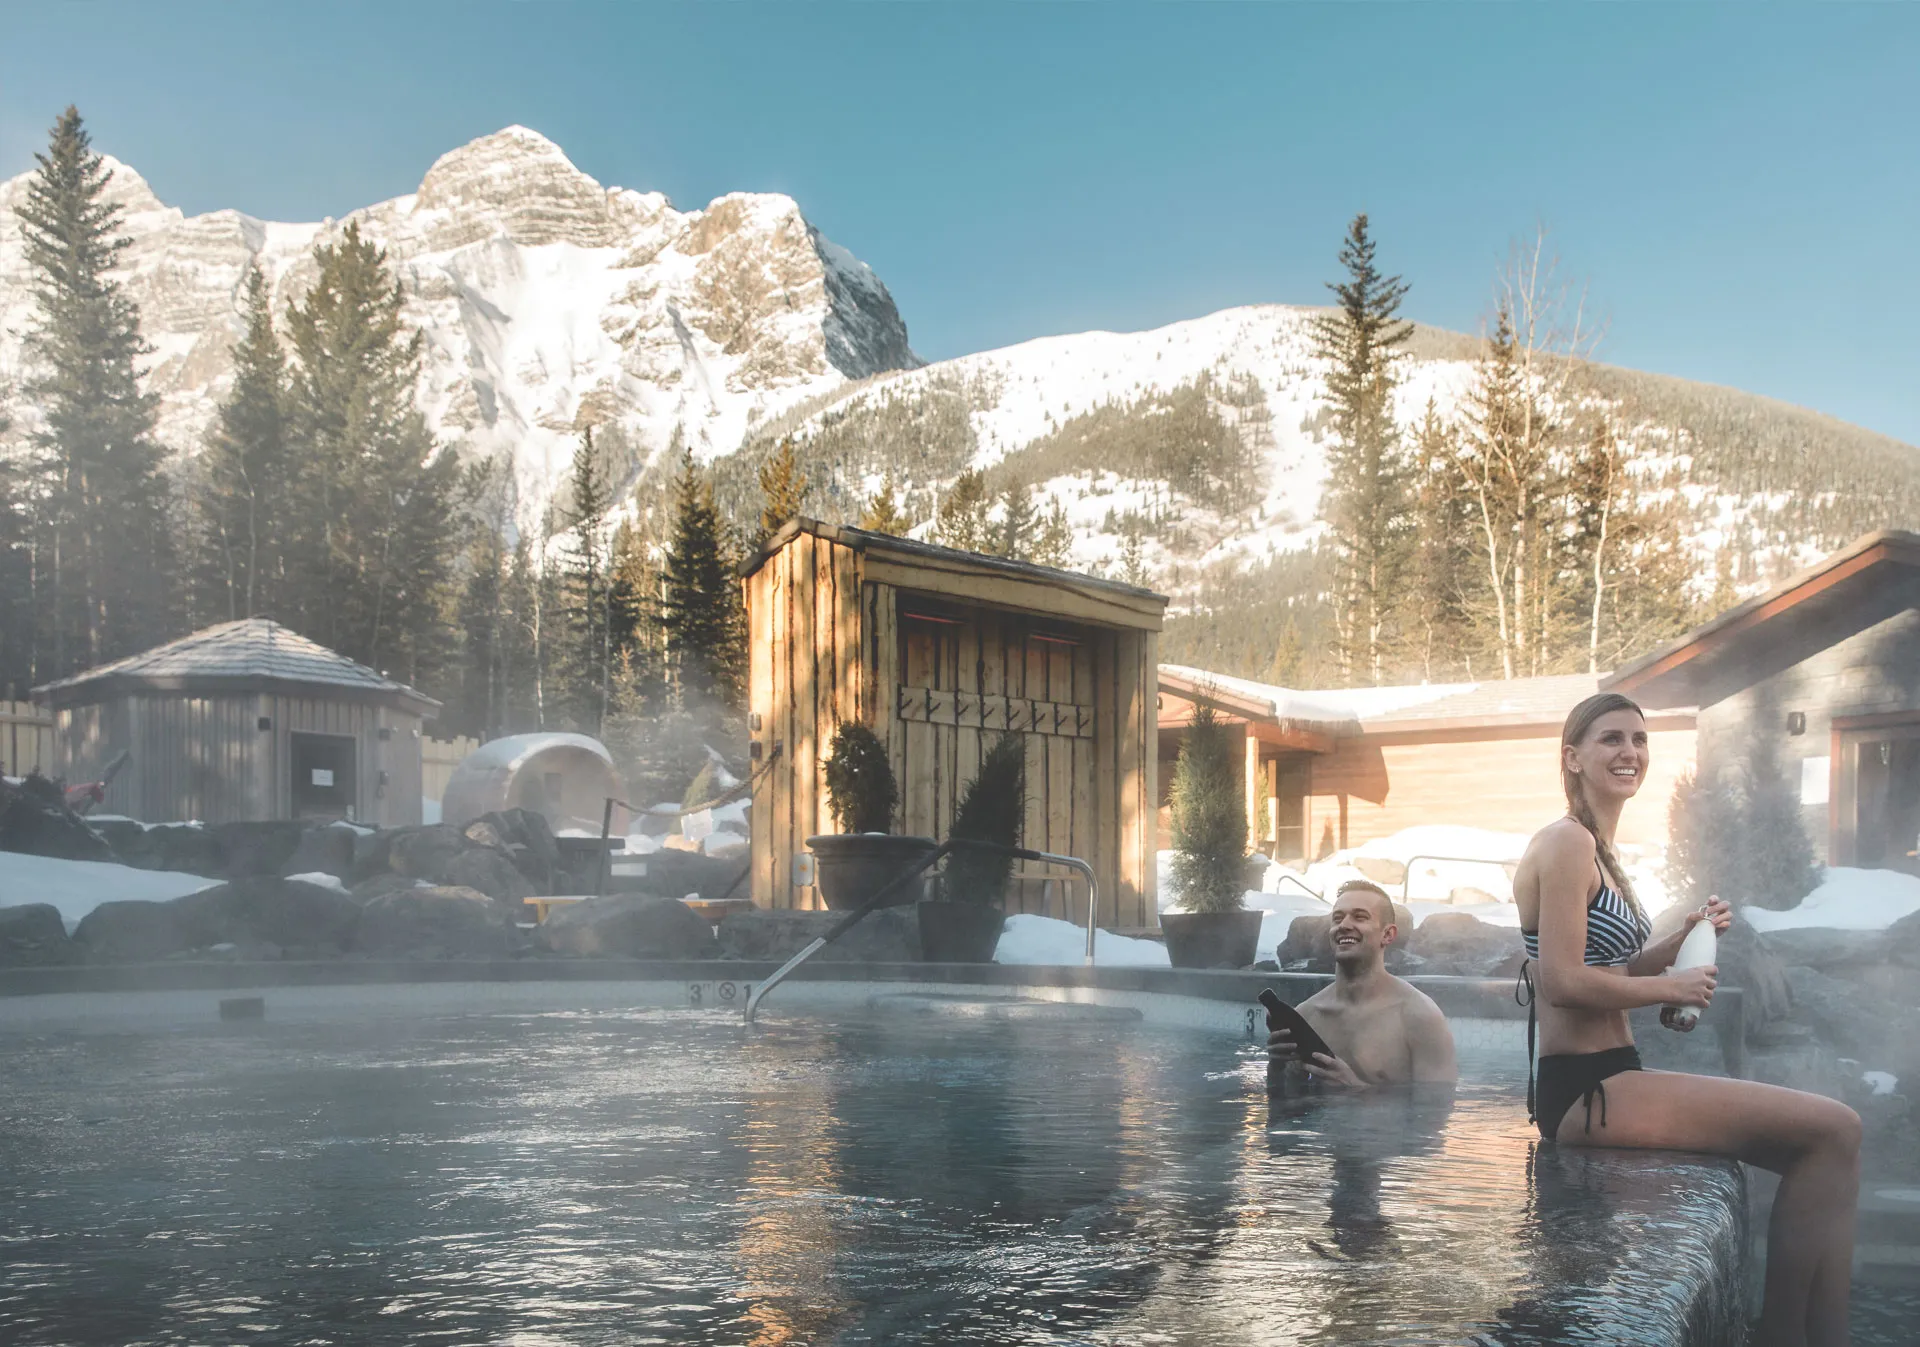 The spa is open 365 days a year (Photo credit: Travel Alberta/Mike Seehagel).